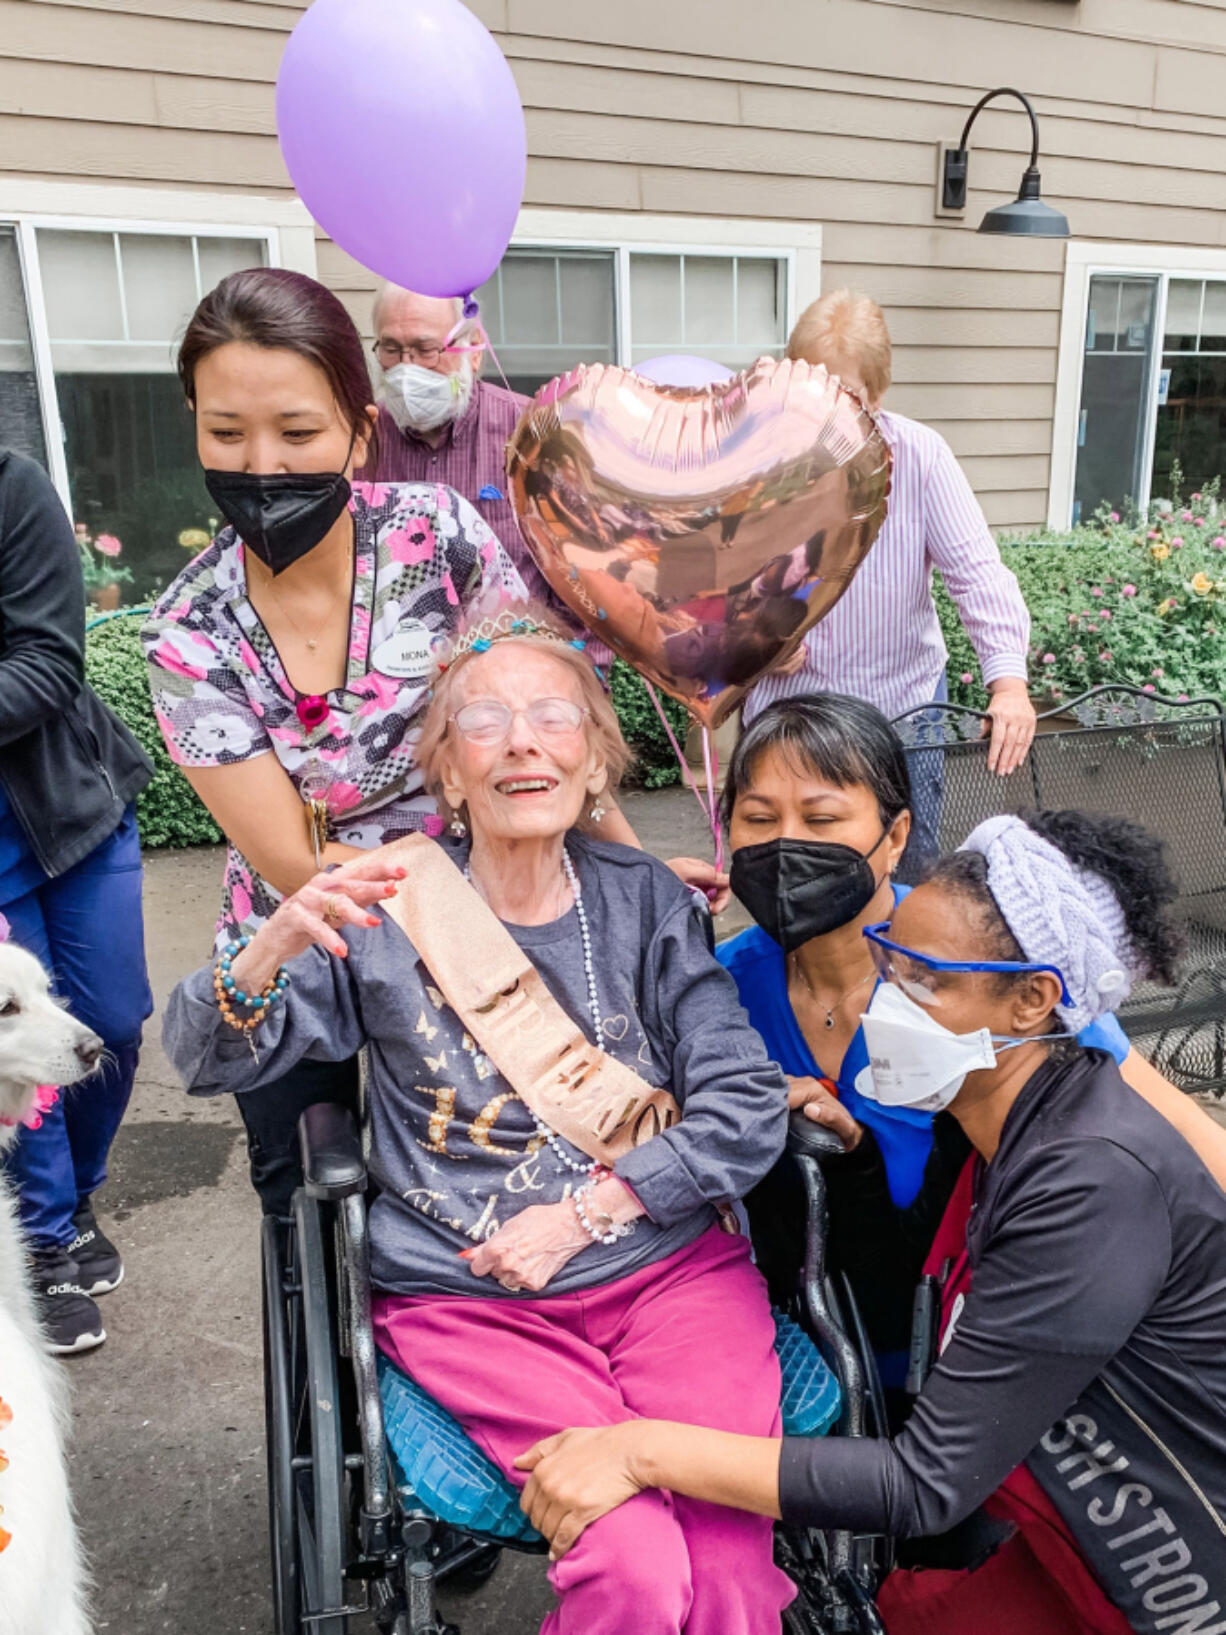 Frieda Moisant, a resident of The Hampton and Ashley Inn in Vancouver, celebrated her 105th birthday alongside family, friends, caregivers.